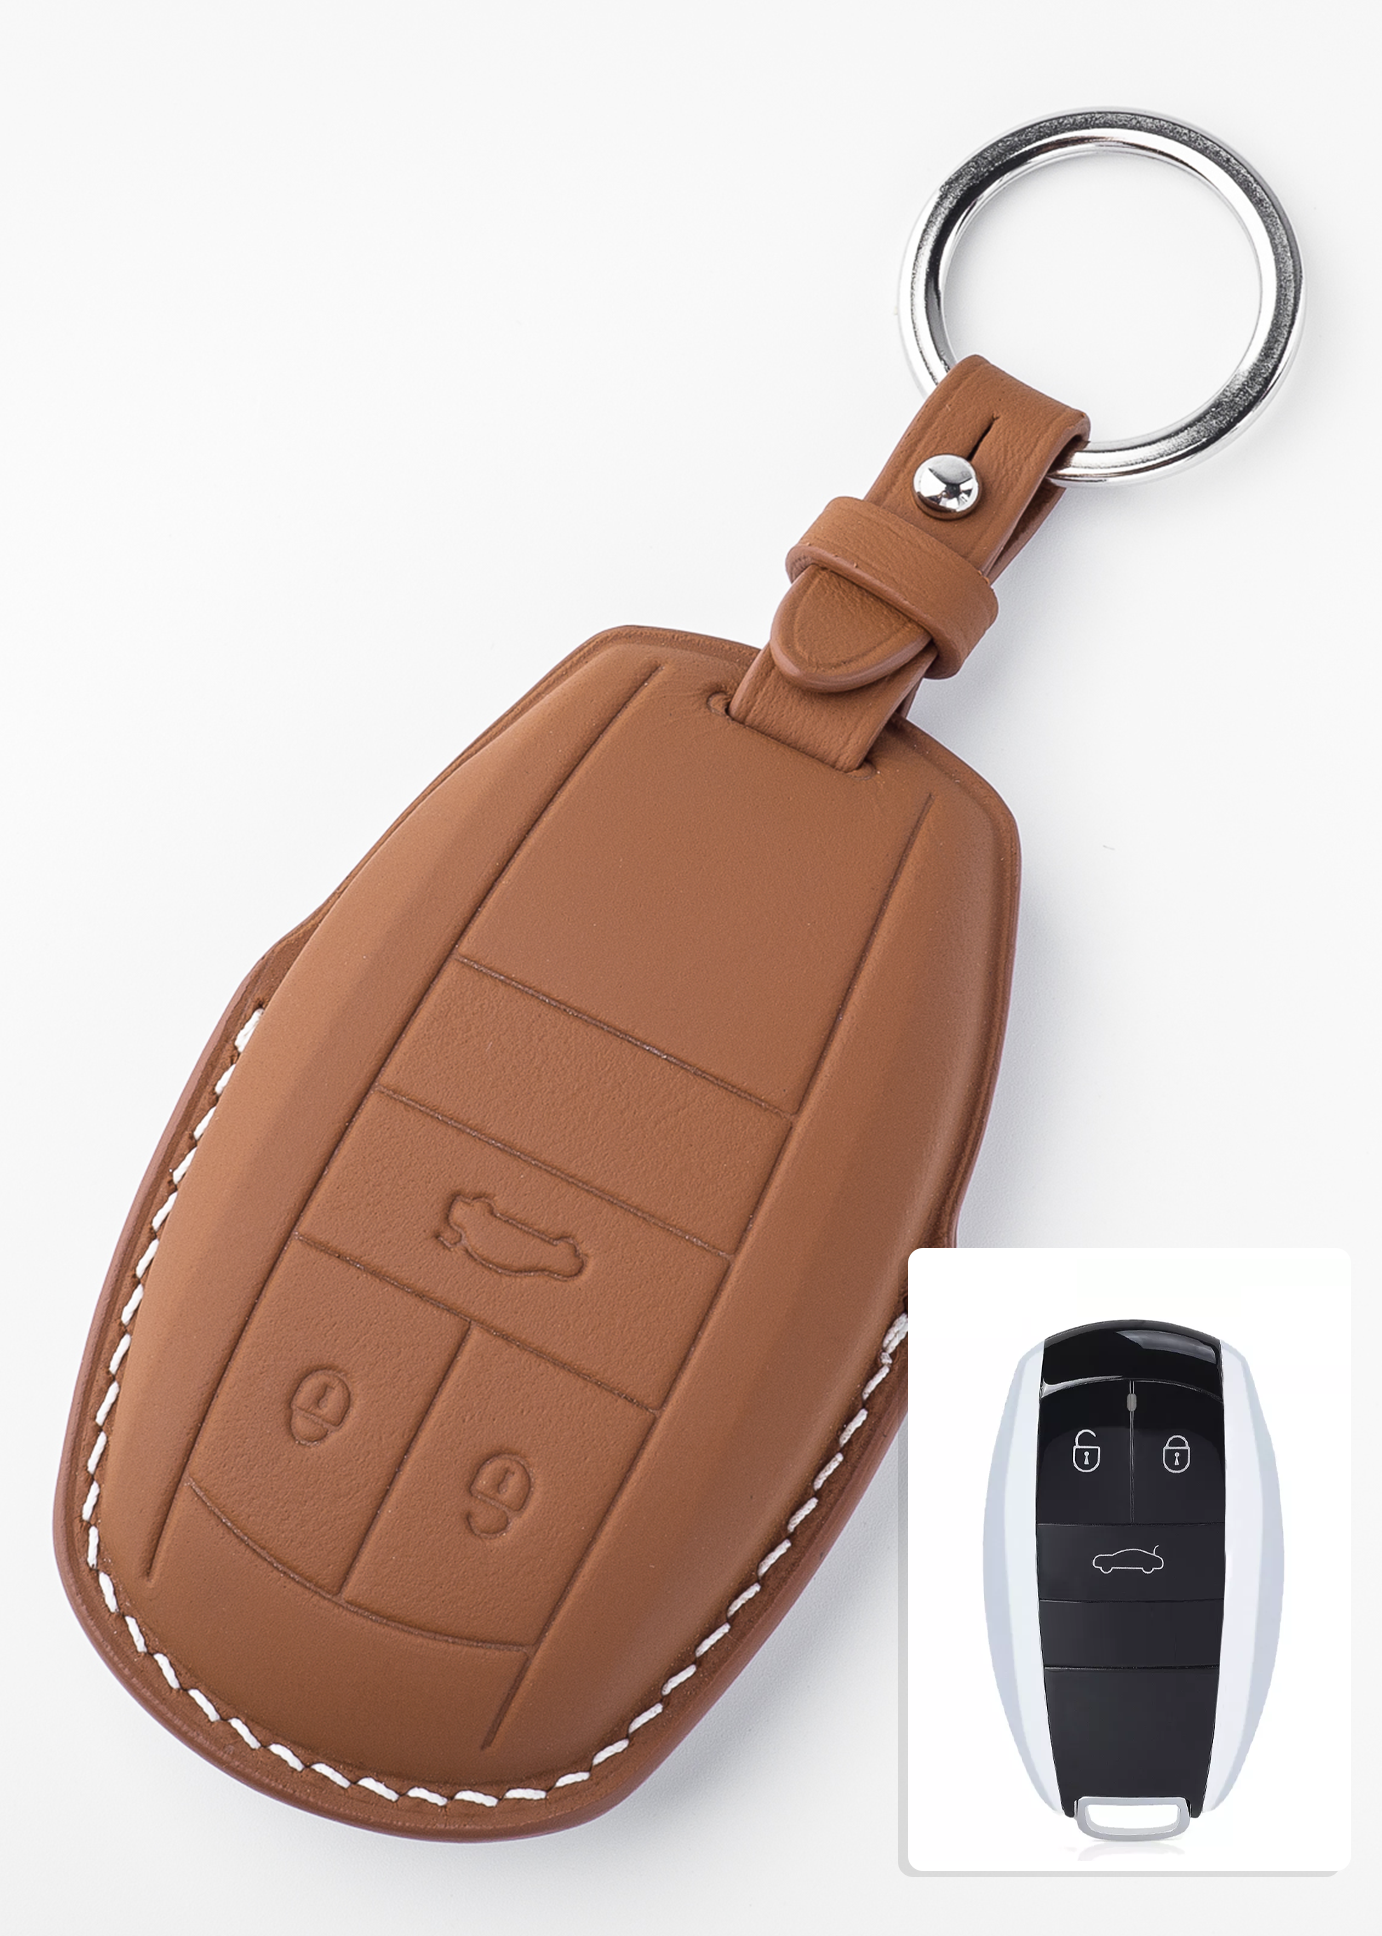 Timotheus for Bentley key fob cover case, Compatible with Bentley key